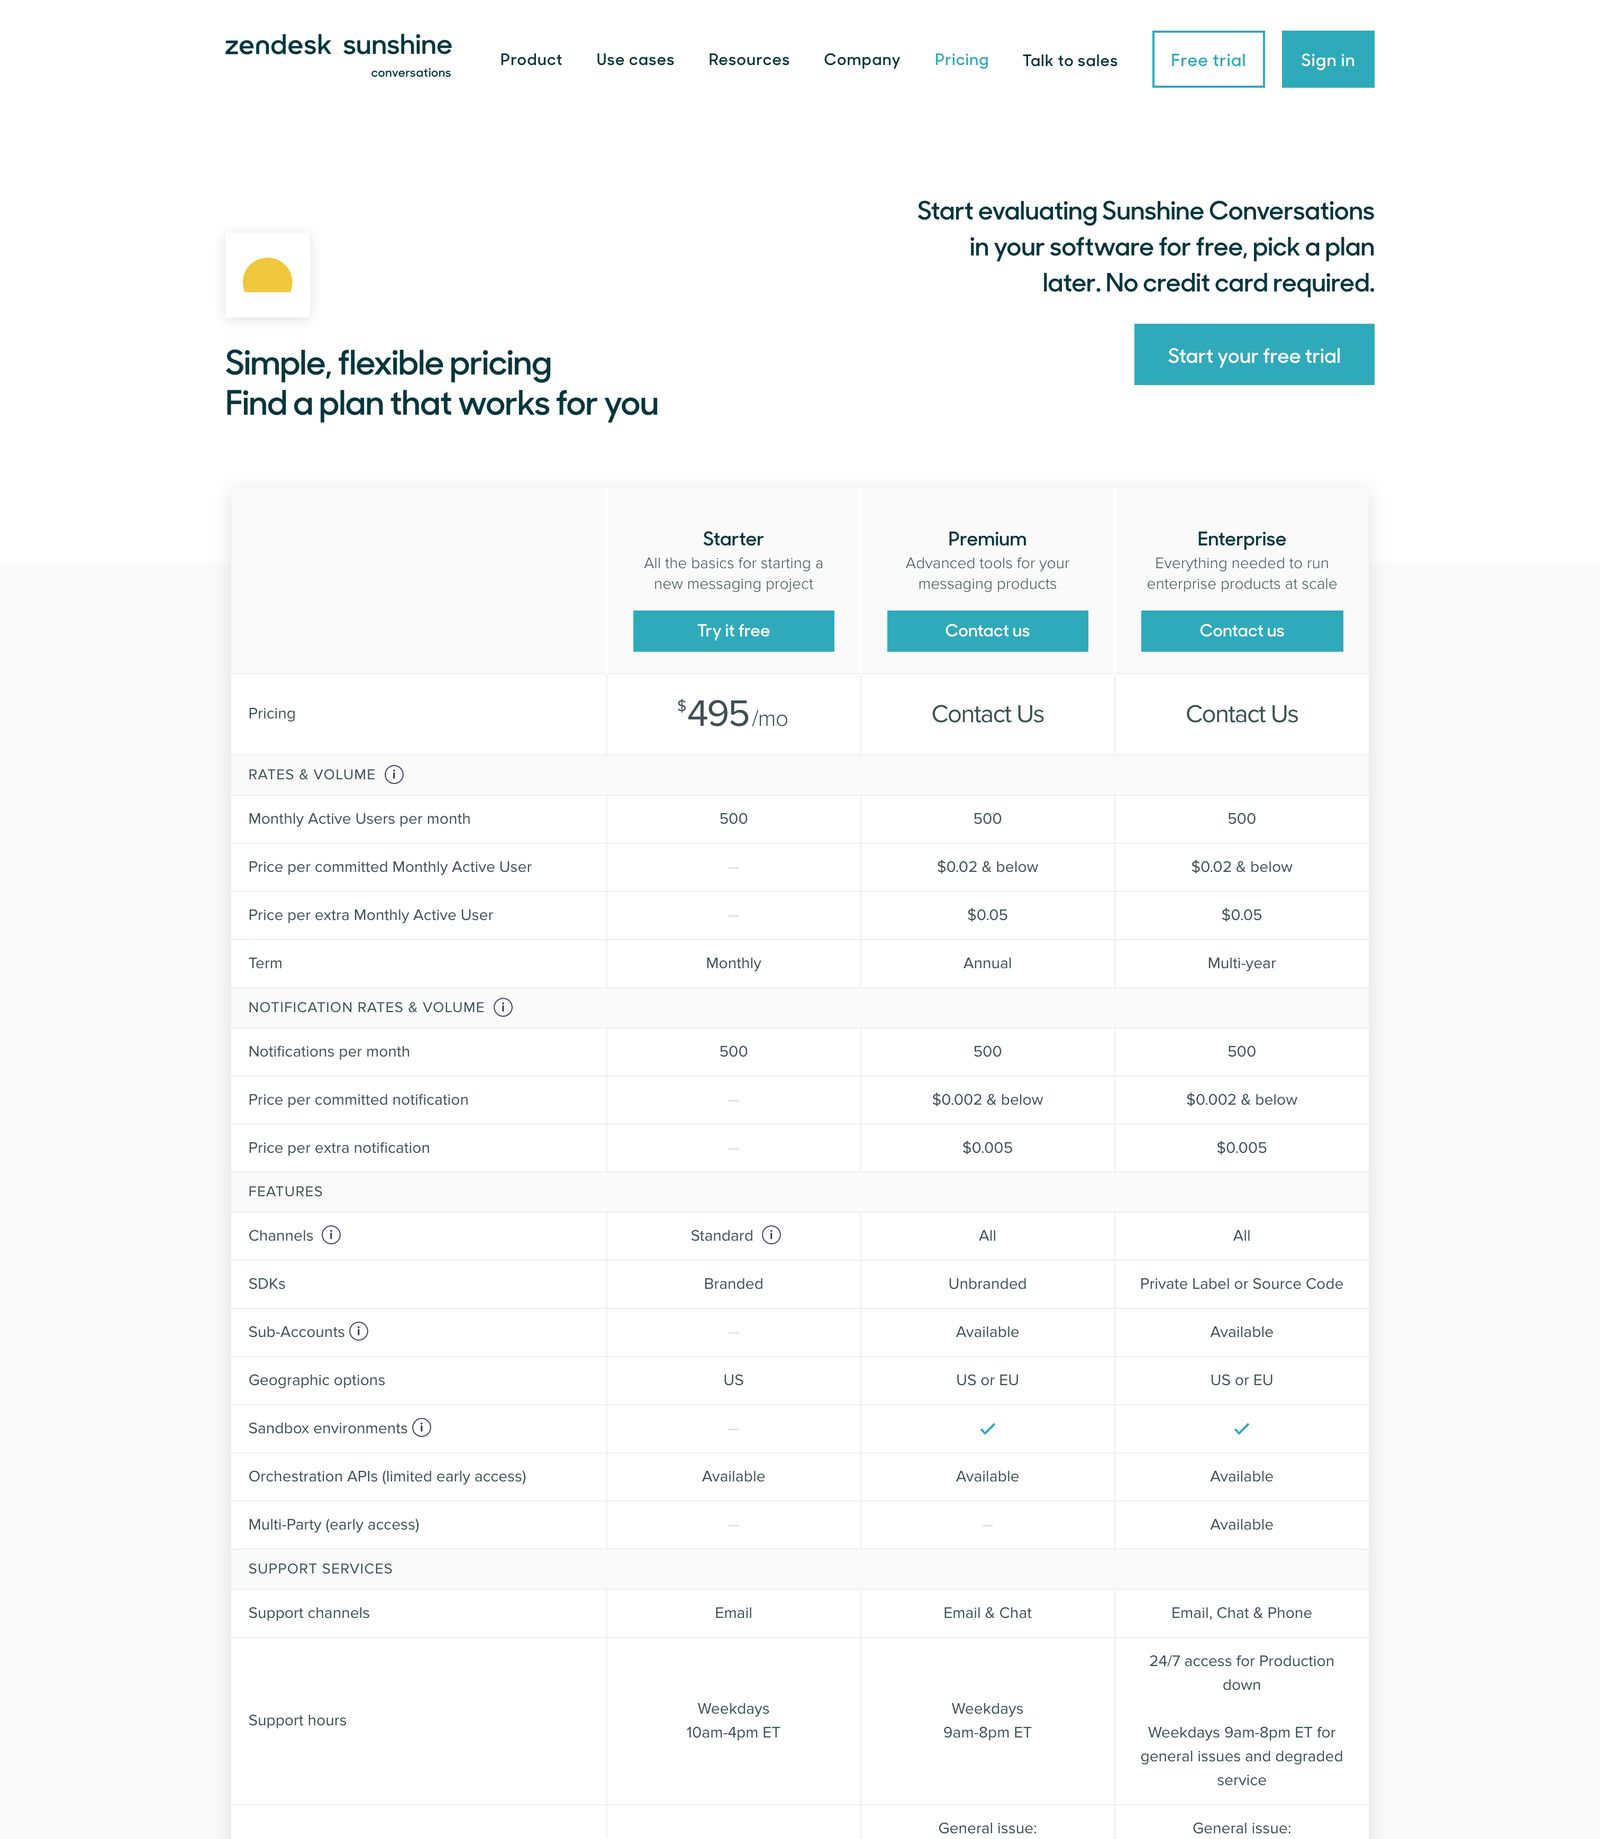 /articles/pricing-page-inspiration/pricing-page-design-example-10.jpg)_Pricing page example from Zendesk